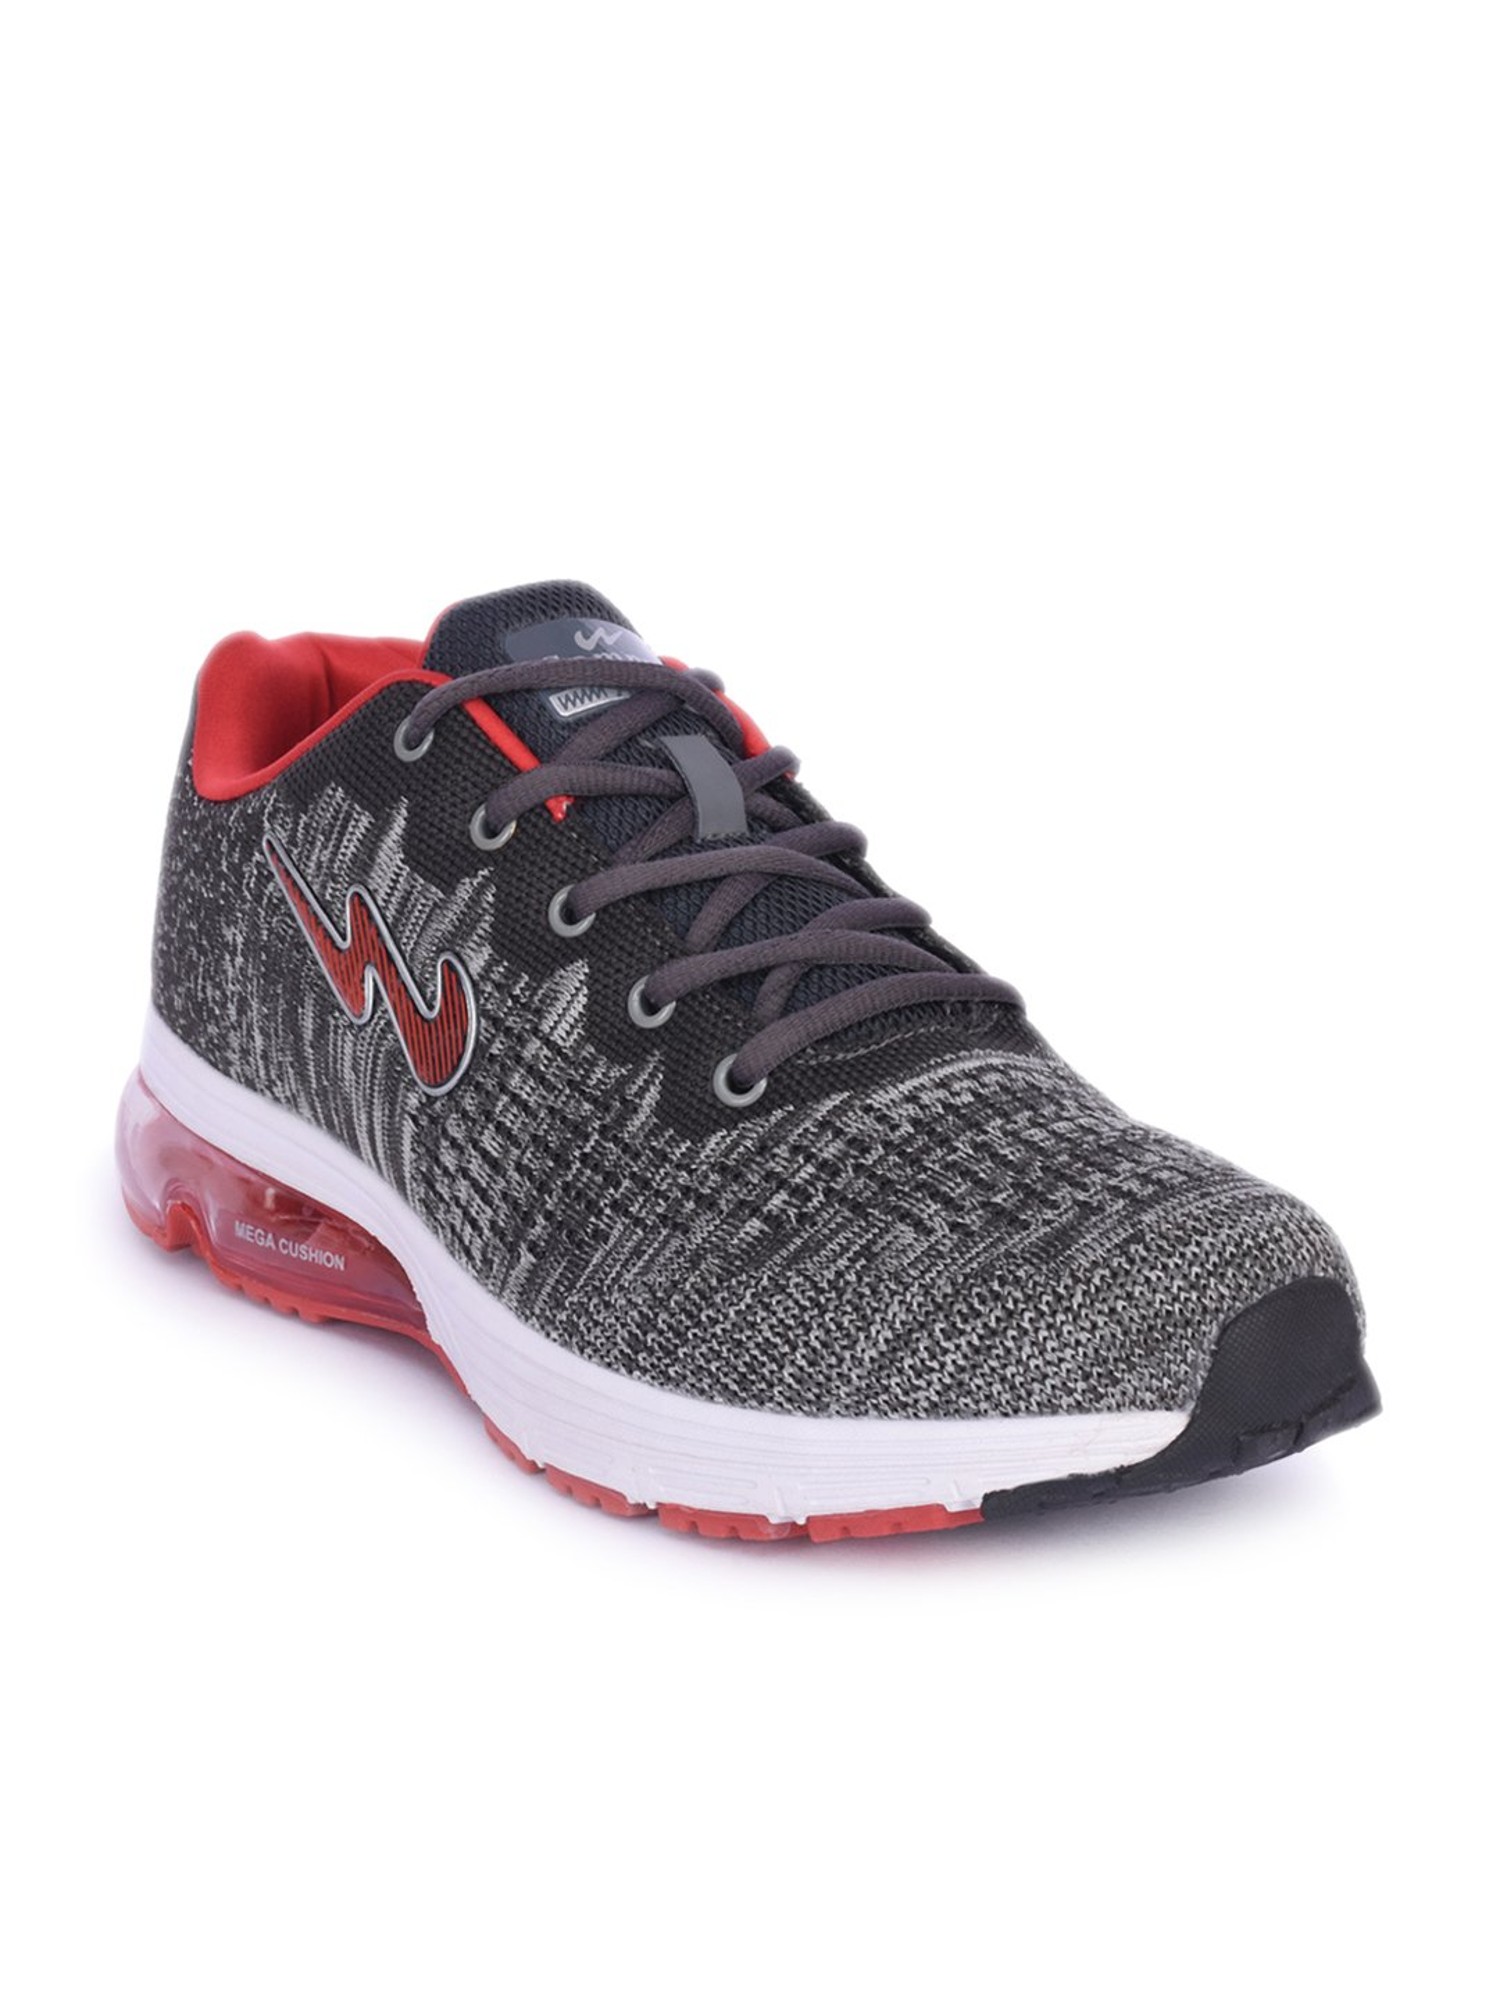 Buy Campus Dark Grey Running Shoes for 